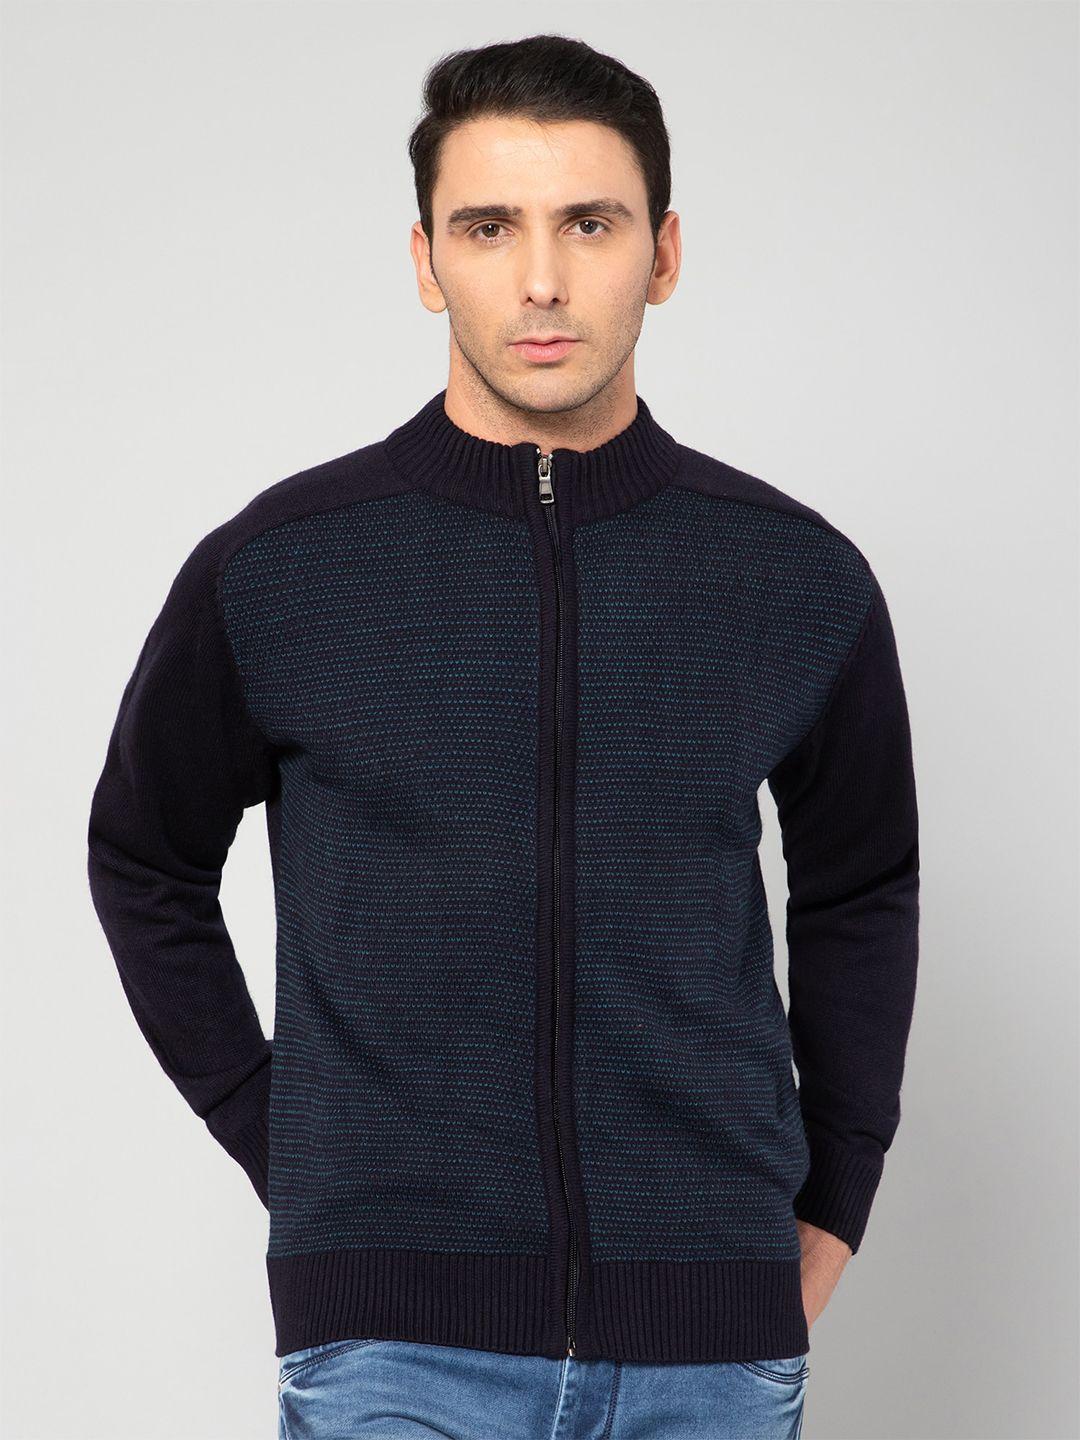 cantabil-men-navy-blue-&-black-ribbed-acrylic-cardigan-with-zip-detail